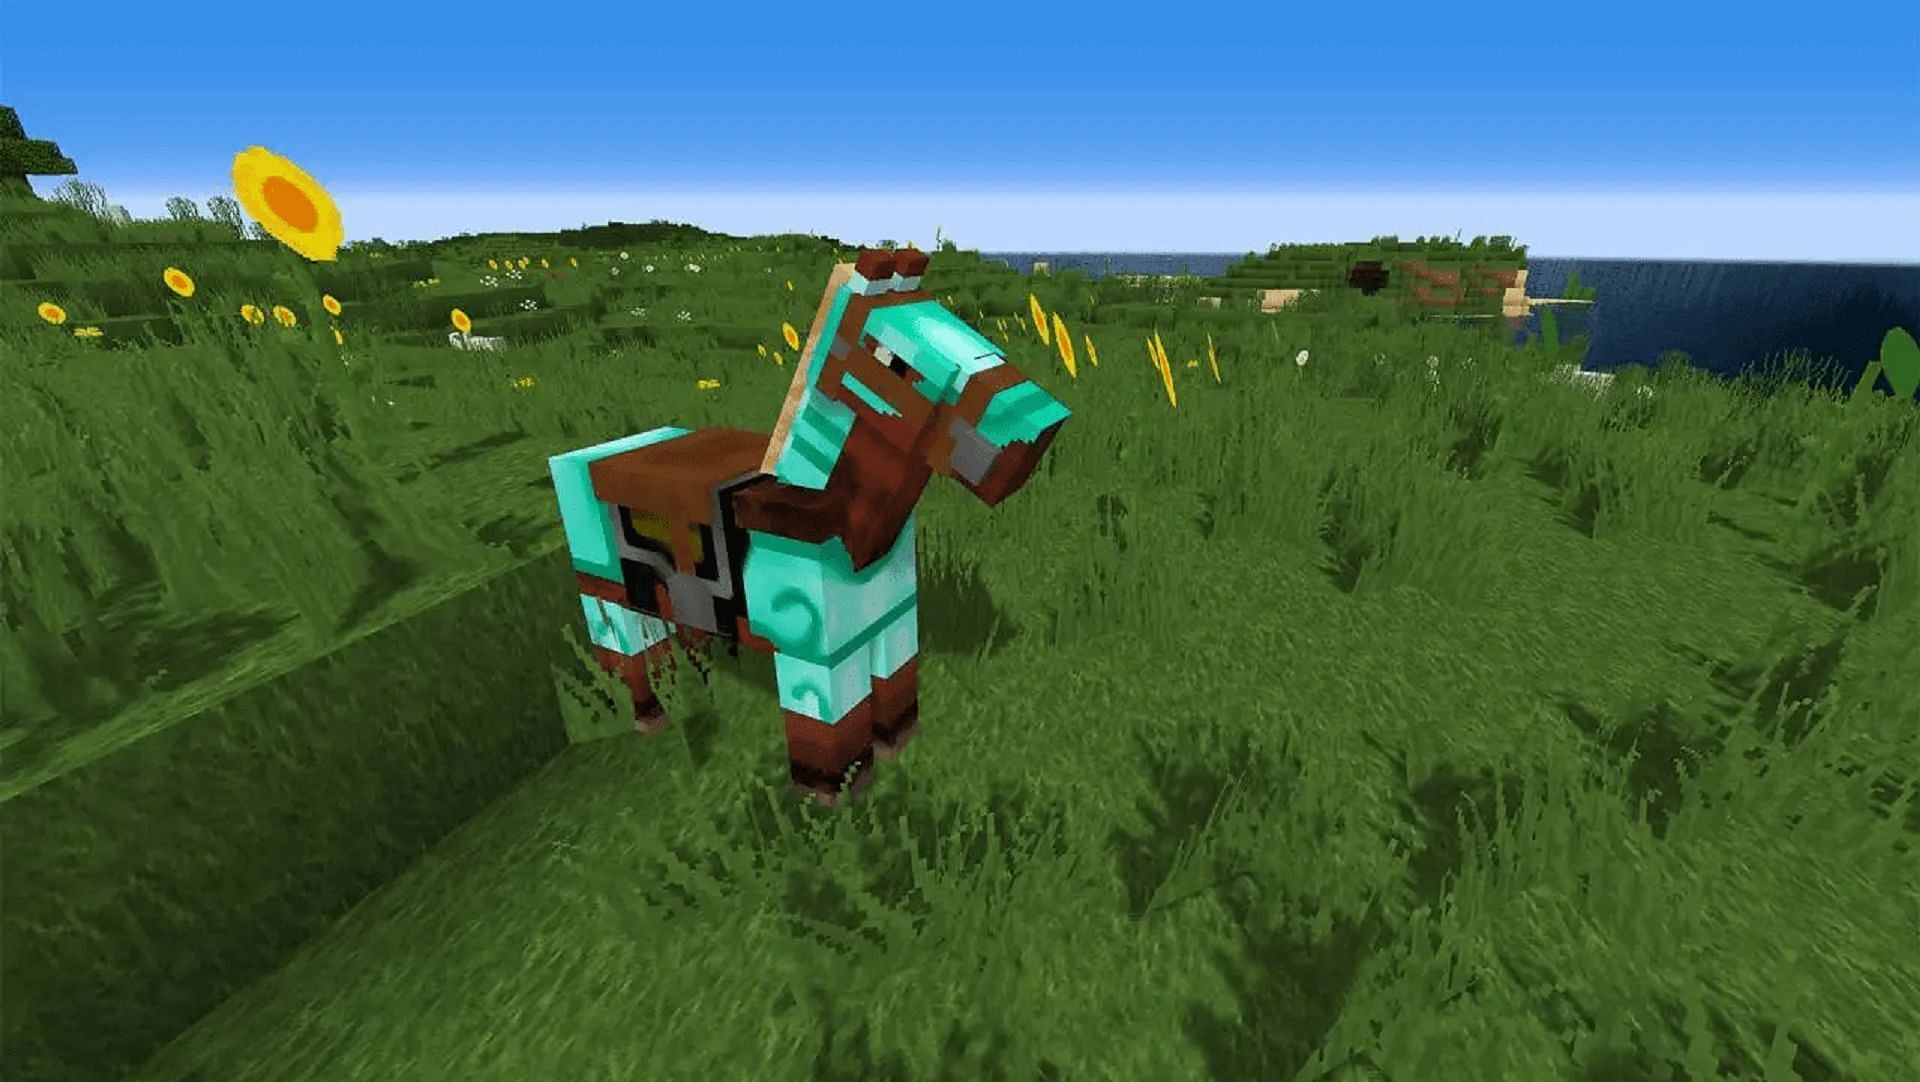 A horse equipped with diamond armor in Minecraft (Image via Mojang)